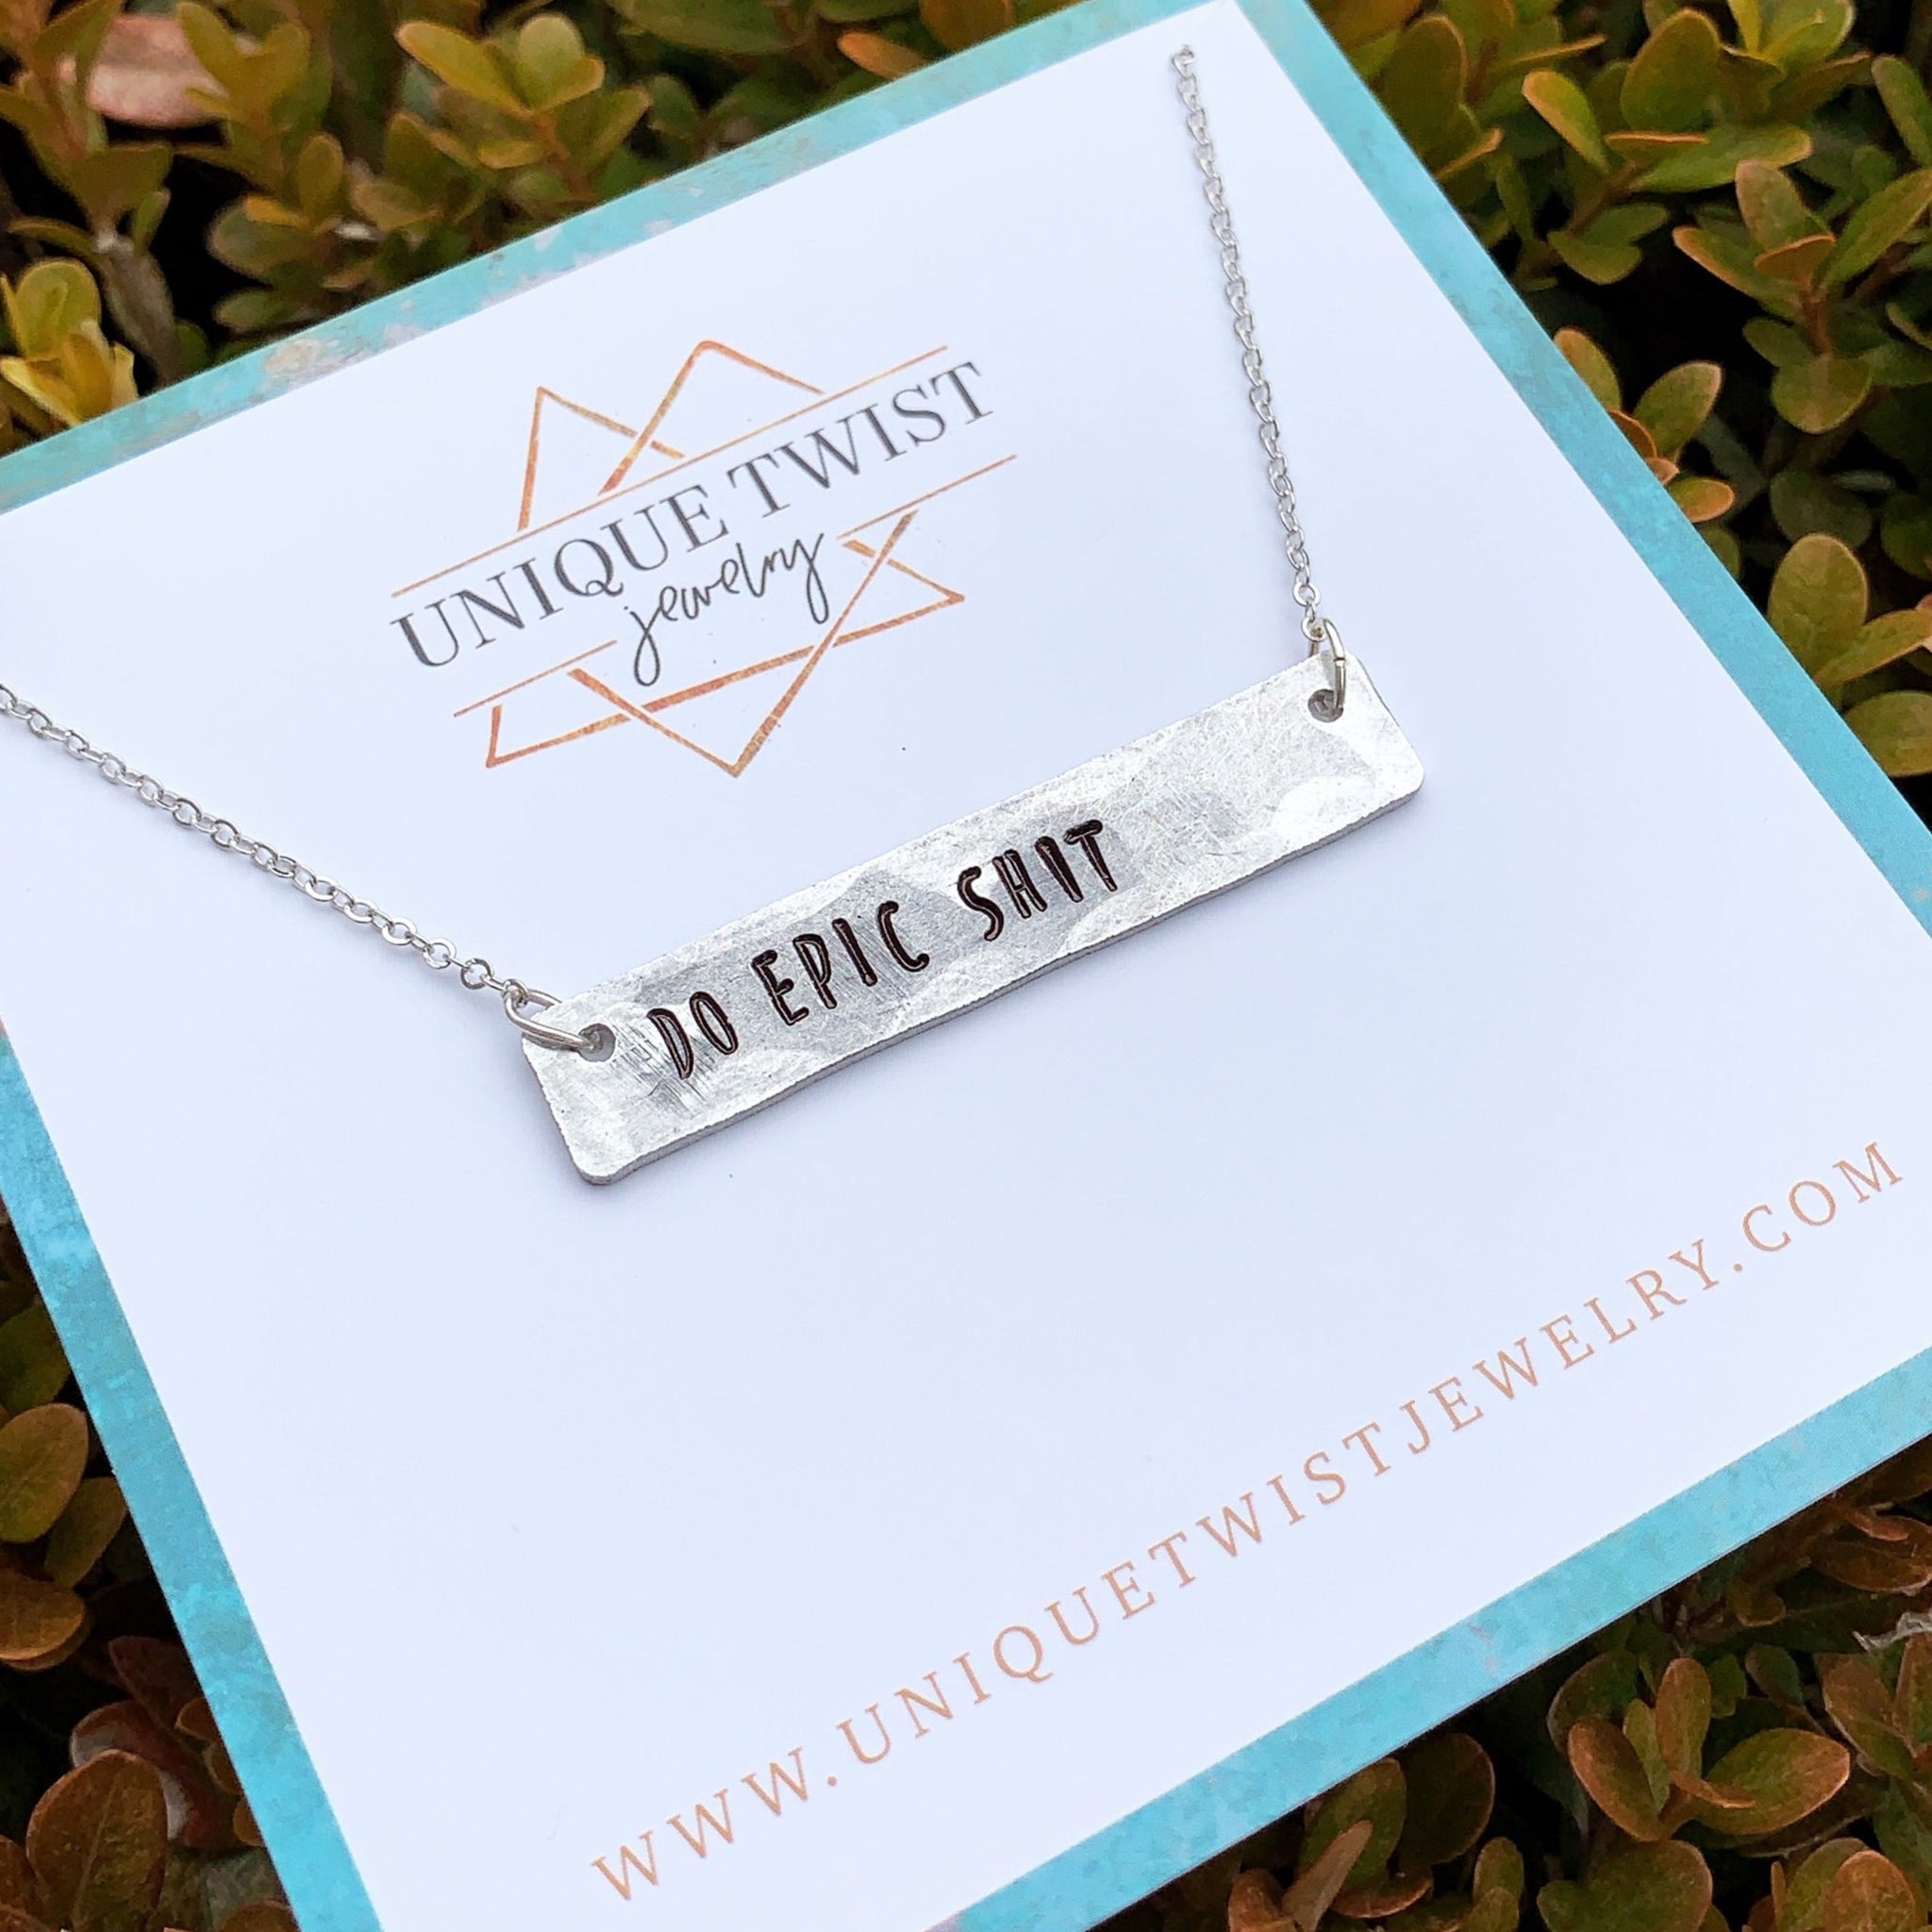 "Do Epic Shit" Hand Stamped Bar Necklace. Handmade jewelry by Unique Twist Jewelry.